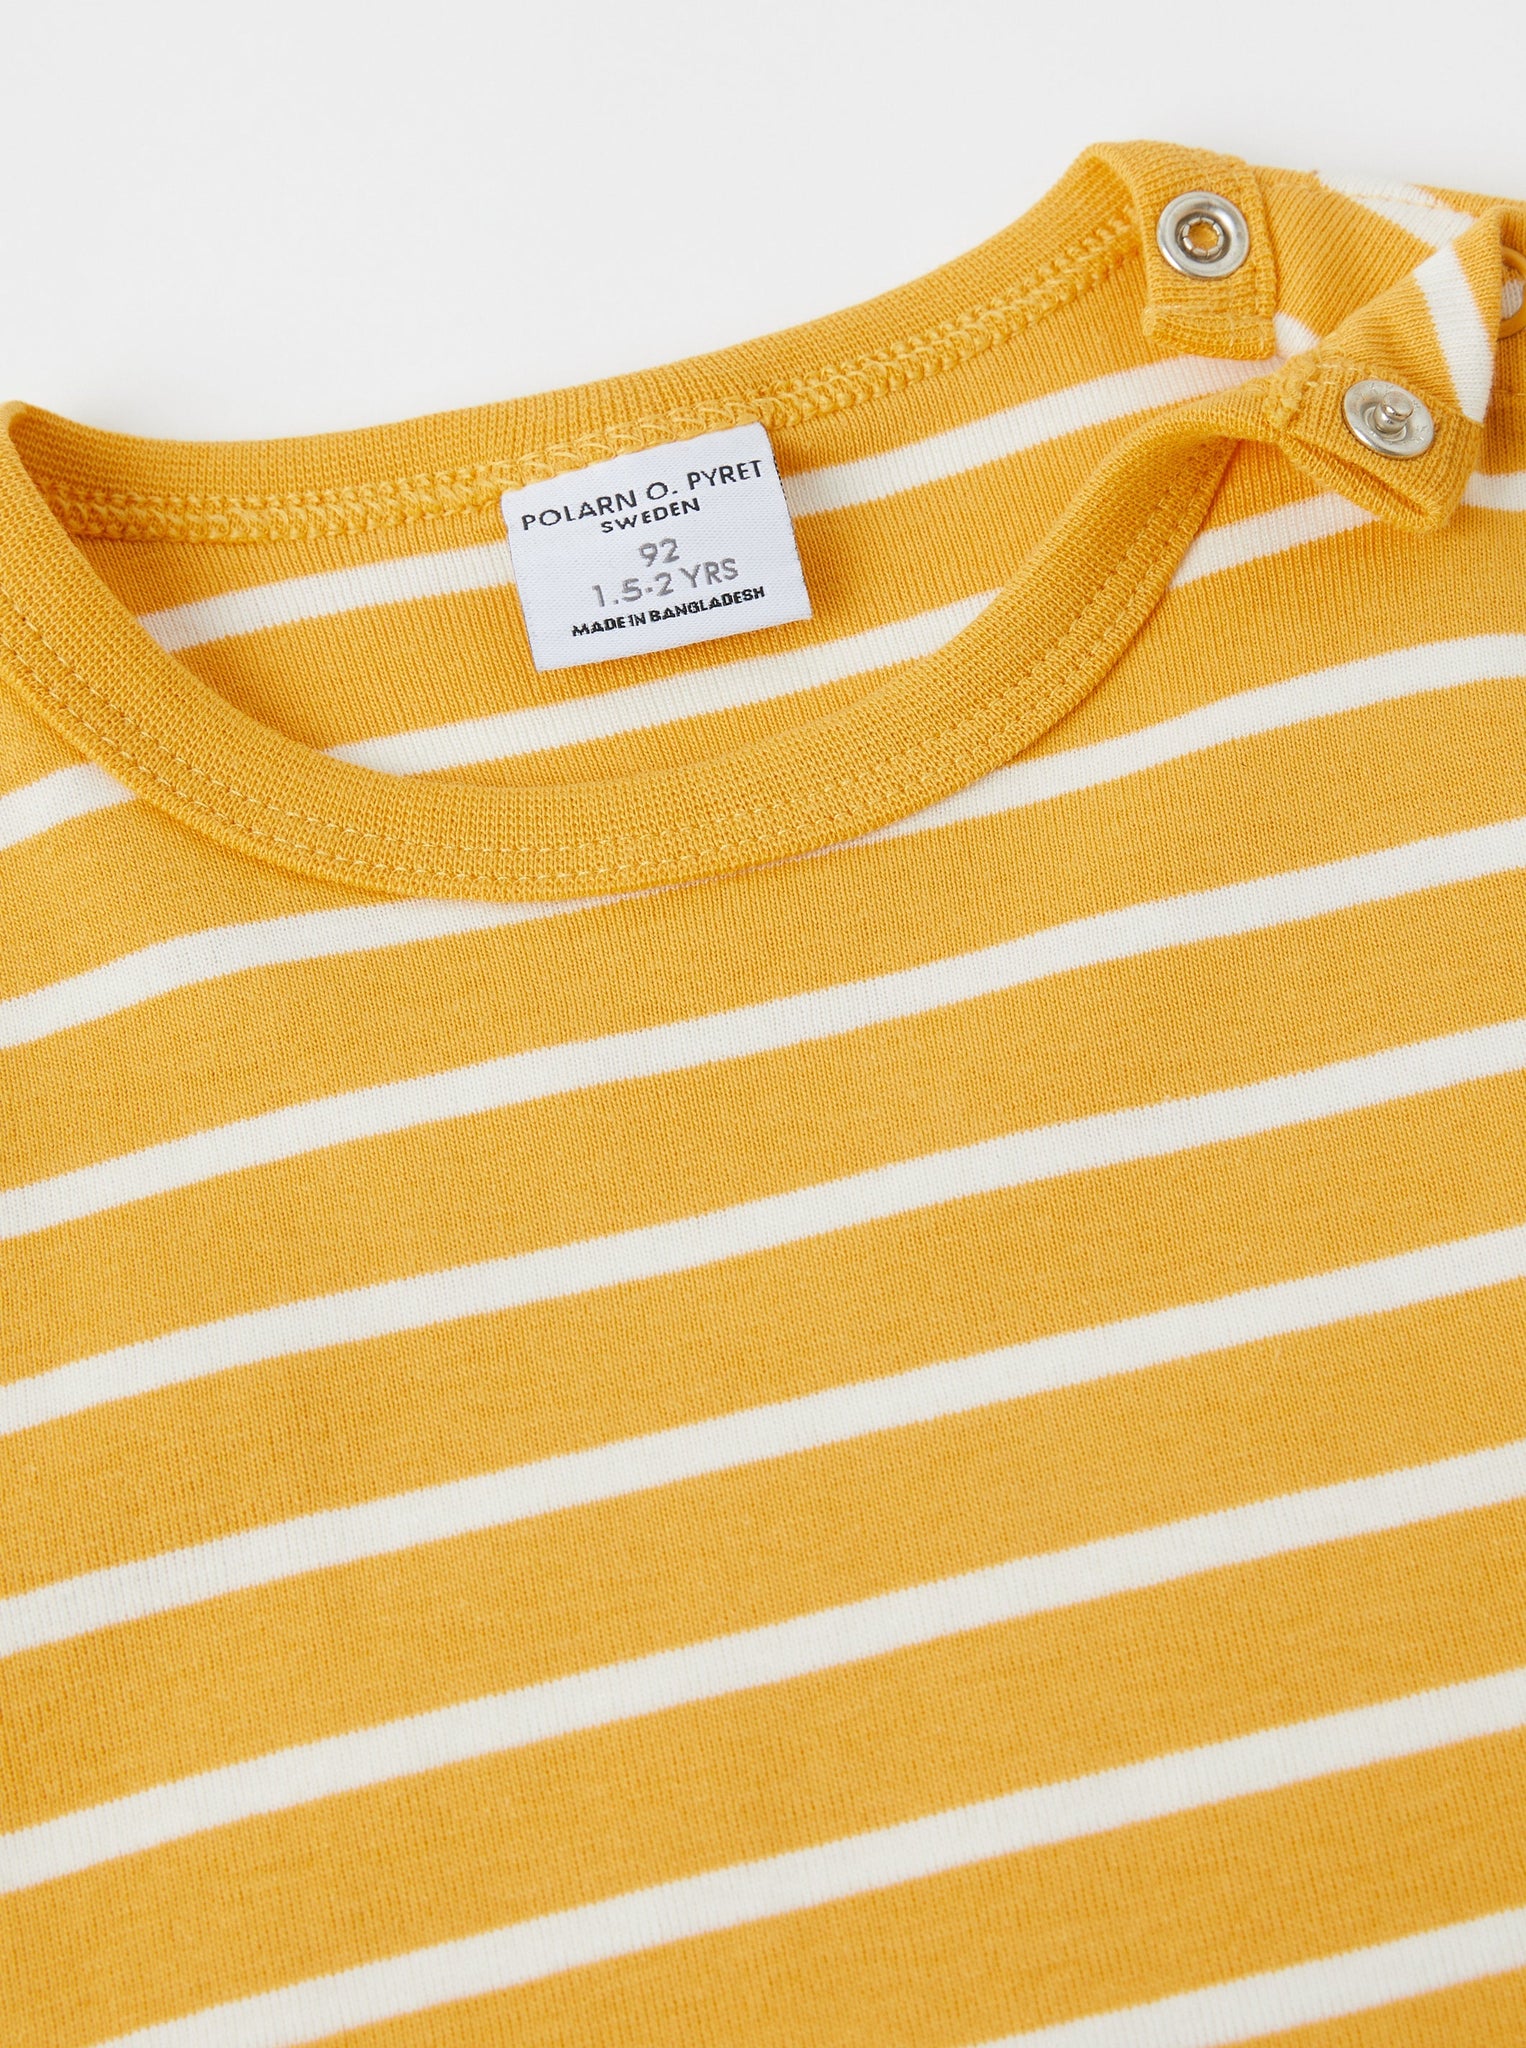 Striped Organic Cotton Yellow Kids Top from the Polarn O. Pyret kidswear collection. Clothes made using sustainably sourced materials.